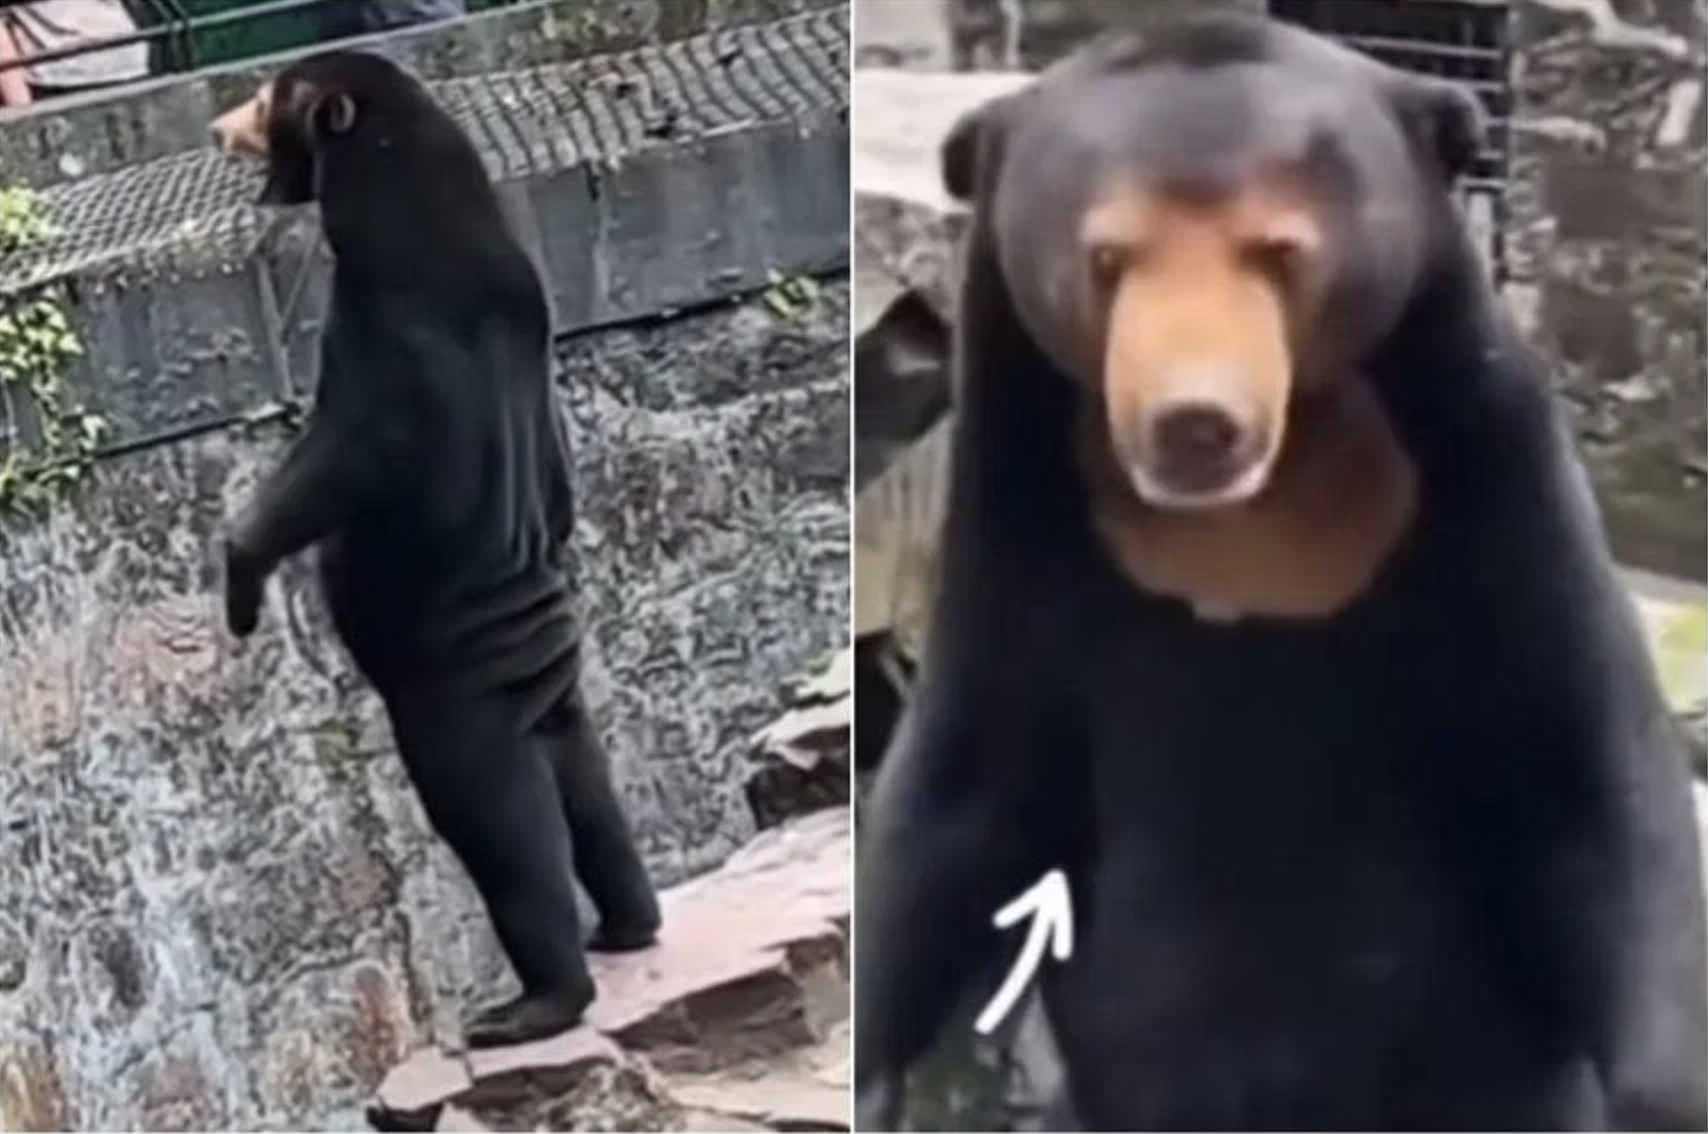 What were some of the reactions and speculations from Weibo users regarding the sun bear video?